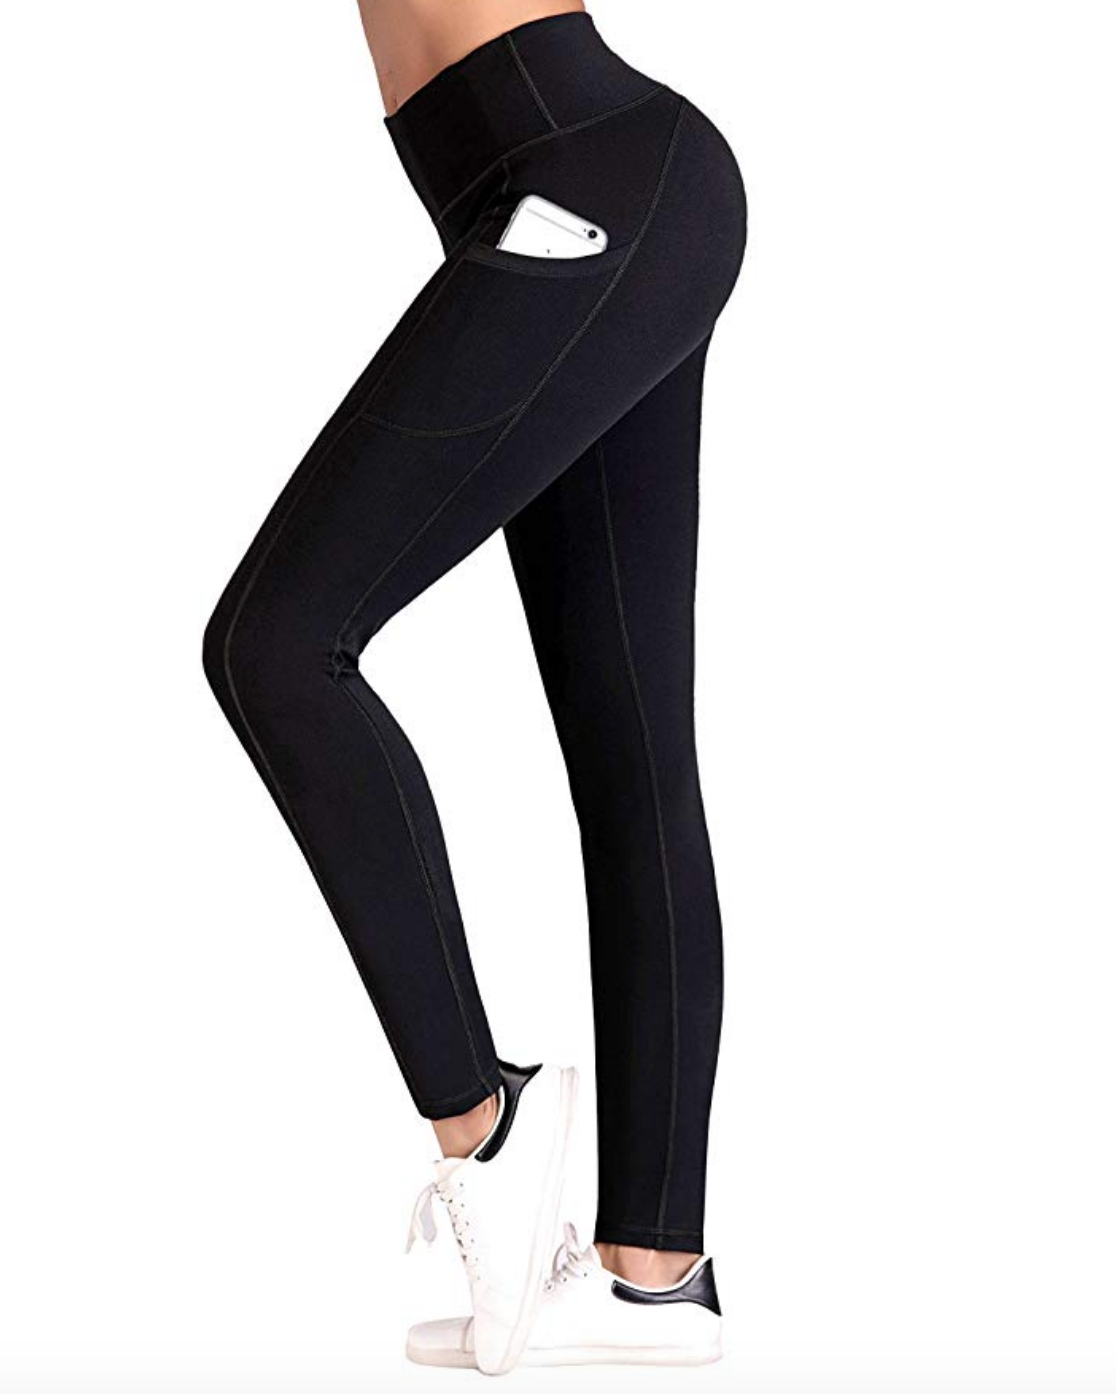 TOPYOGAS Womens Casual Flare Leggings with Pocket Bootleg Yoga